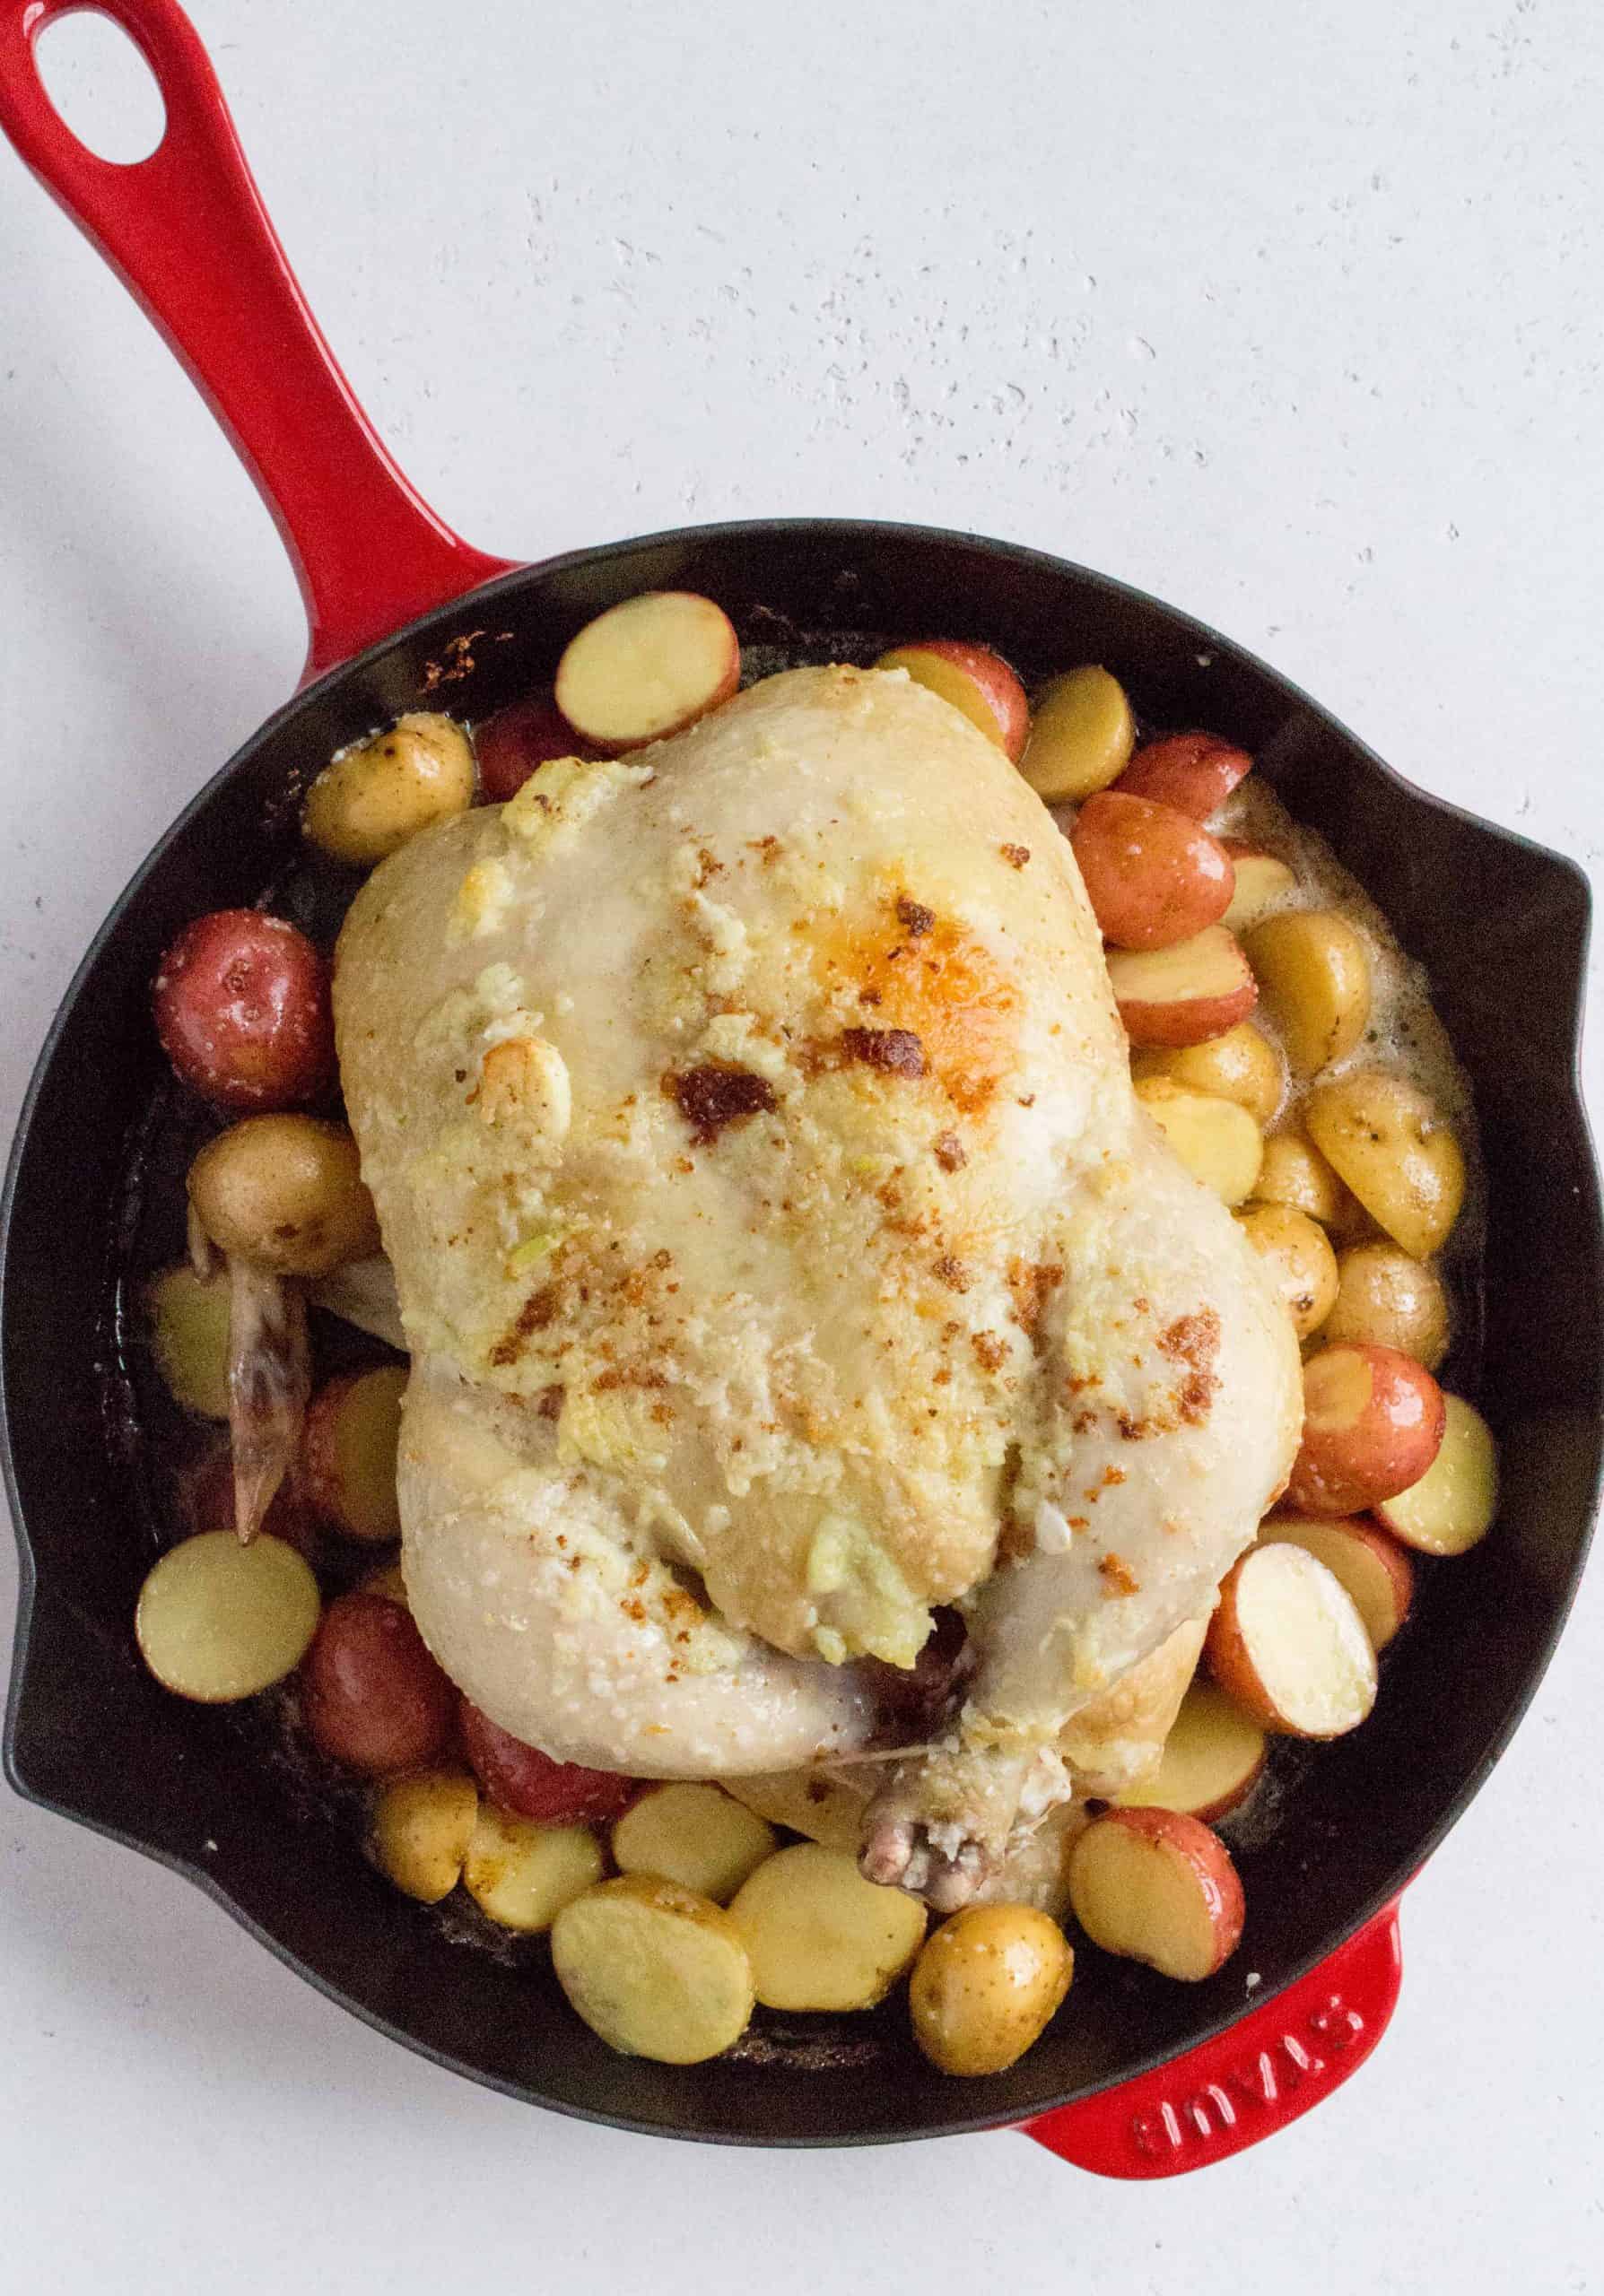 Bake for 10 minutes before pulling out the skillet. Baste the chicken with the melted butter in the pan (by spooning melted butter onto the top of the chicken) before adding in the baby potatoes around the chicken. Sprinkle some salt on and make sure the potatoes are coated in butter and salt.